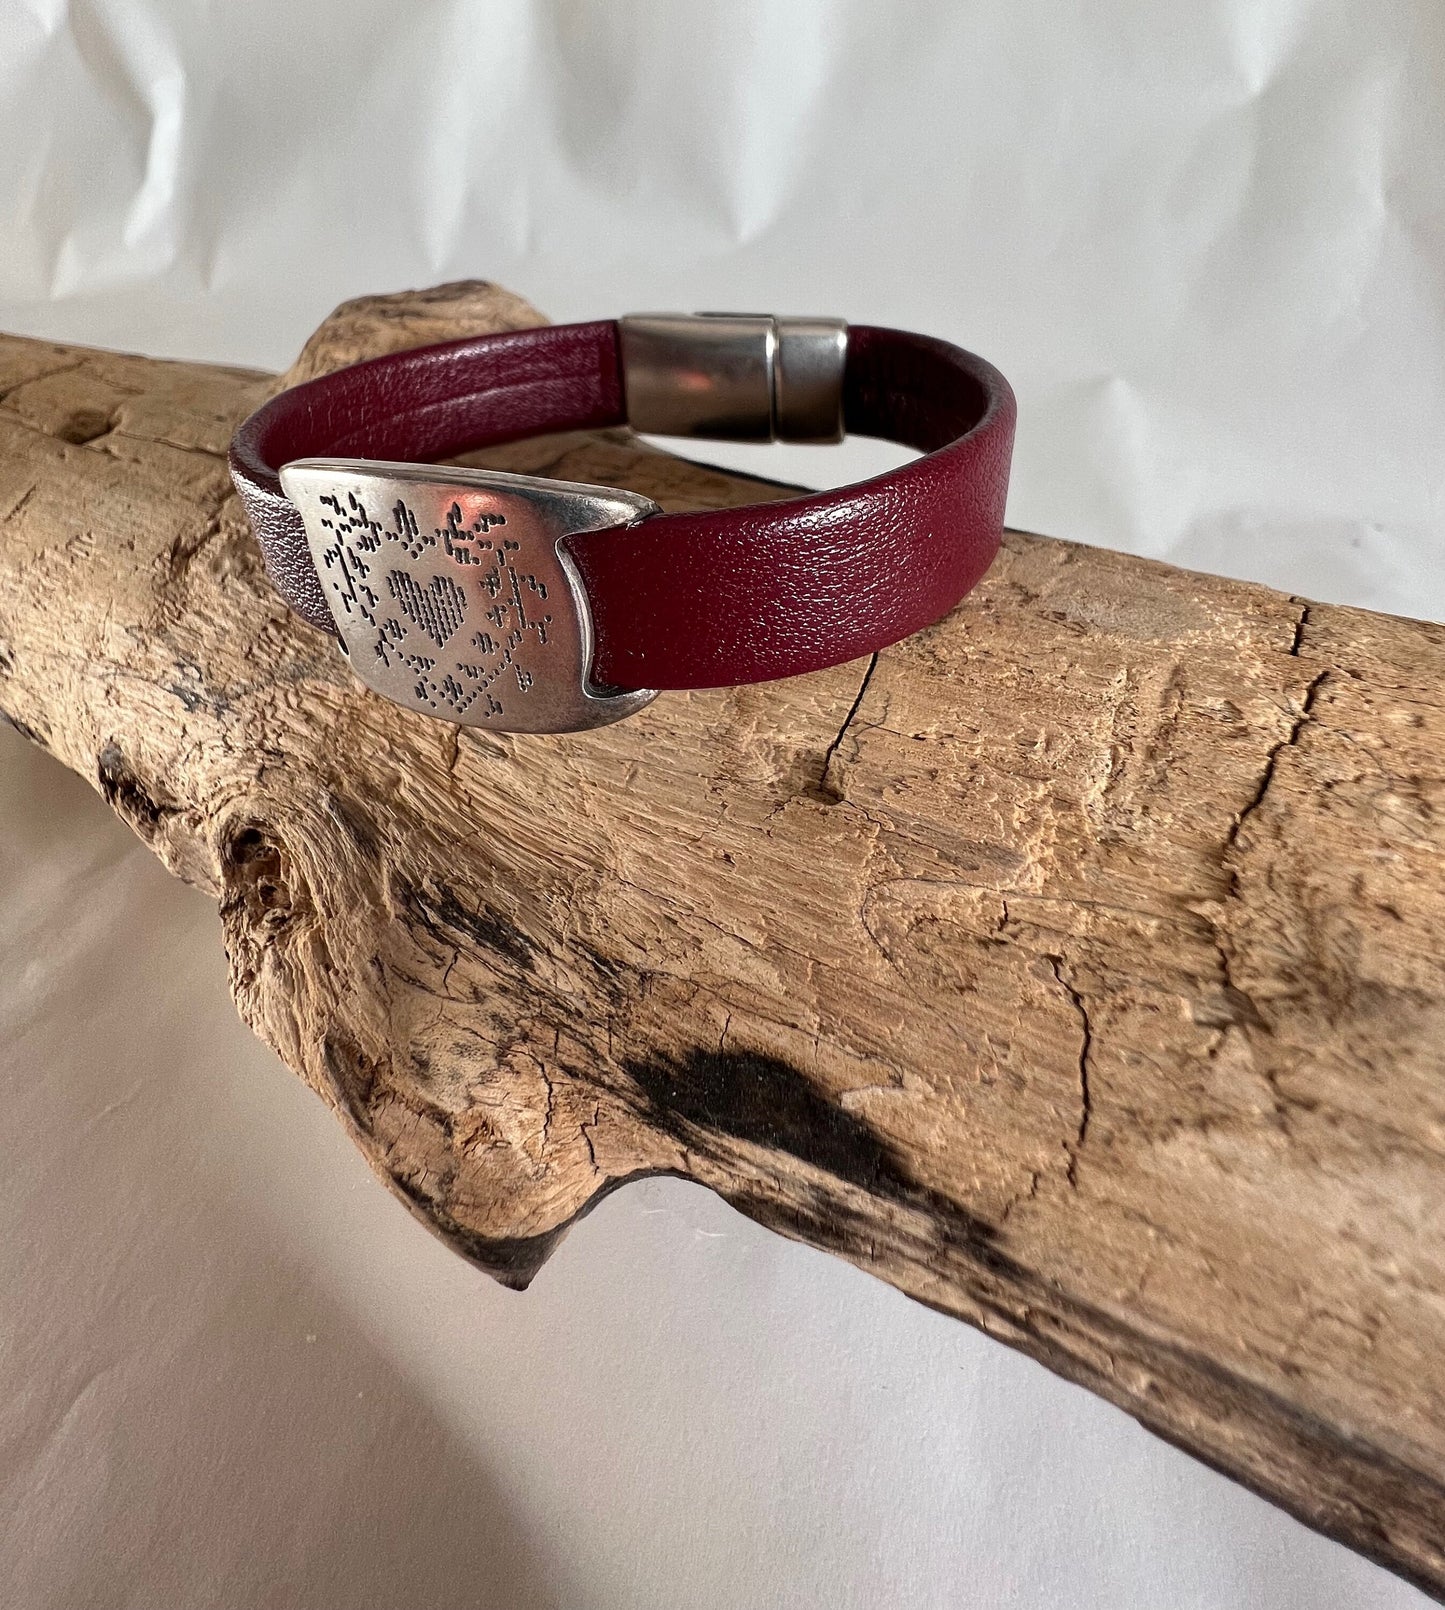 Italian rich deep red leather bracelet with heart etched silver accent piece. Closed with a silver magnetic clasp.